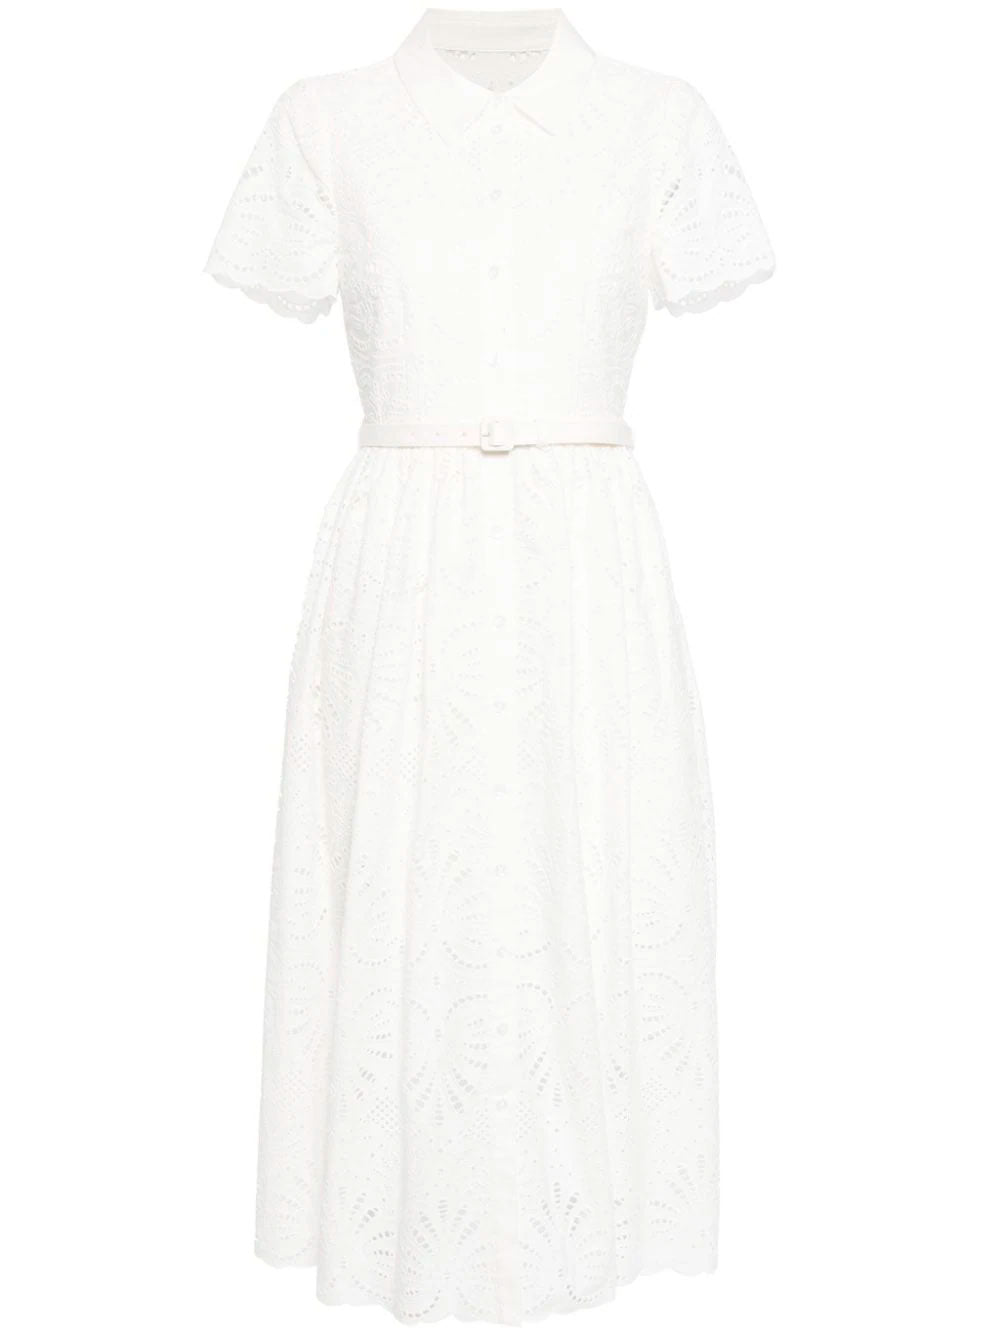 Broderie-anglaise dress